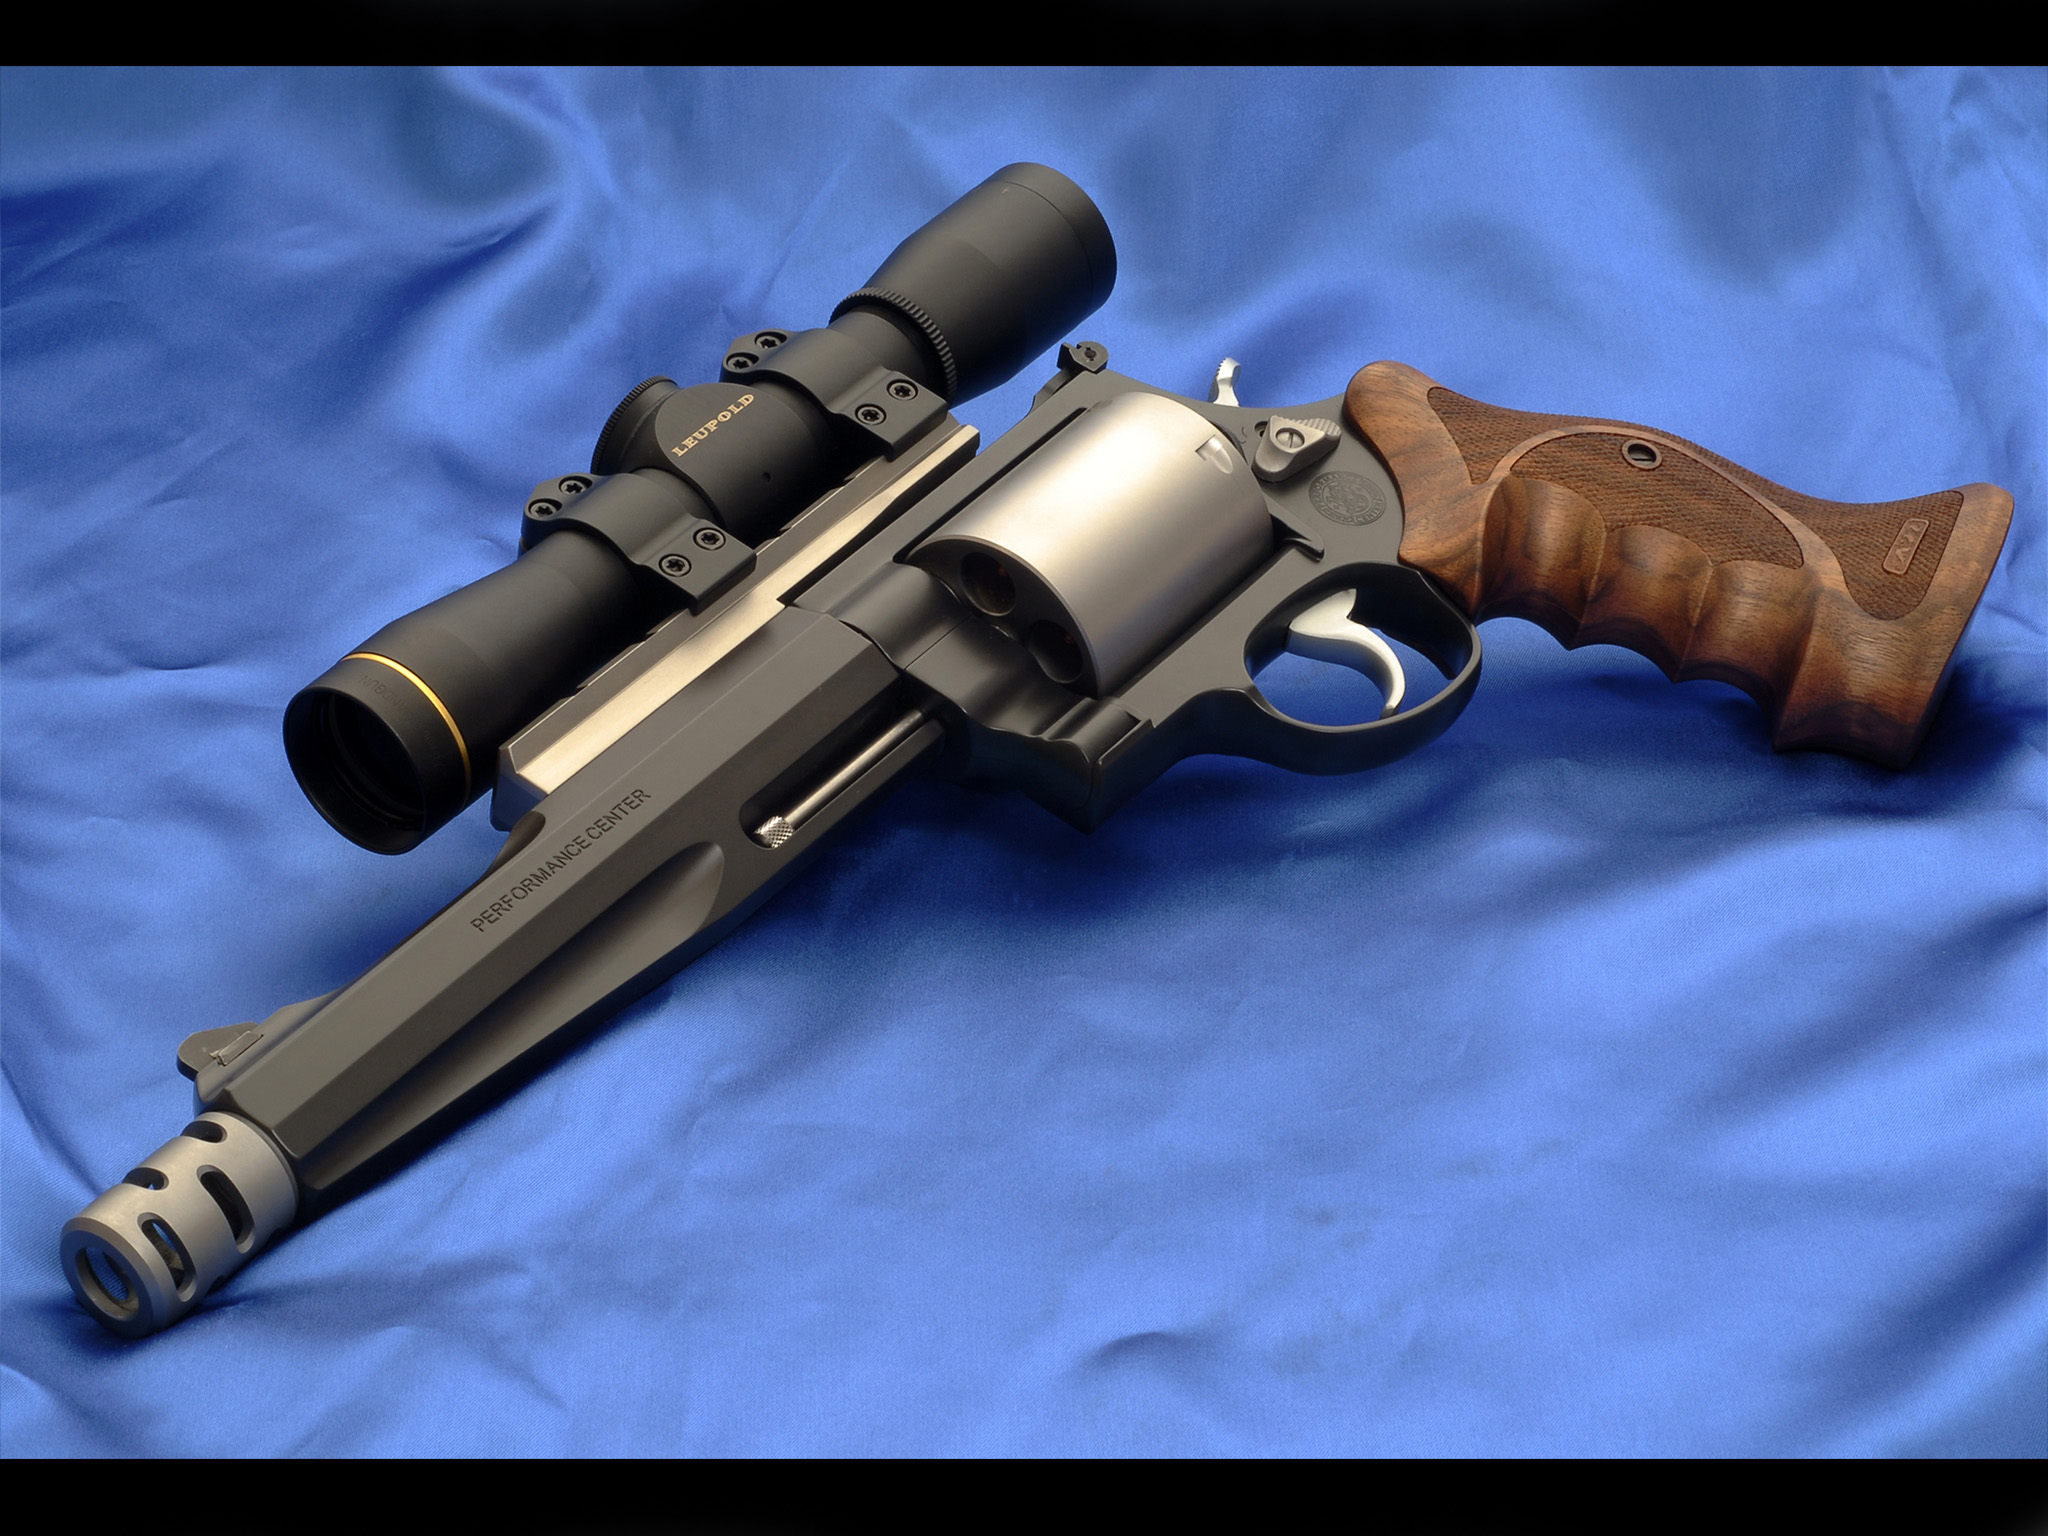 Smith & Wesson model 500